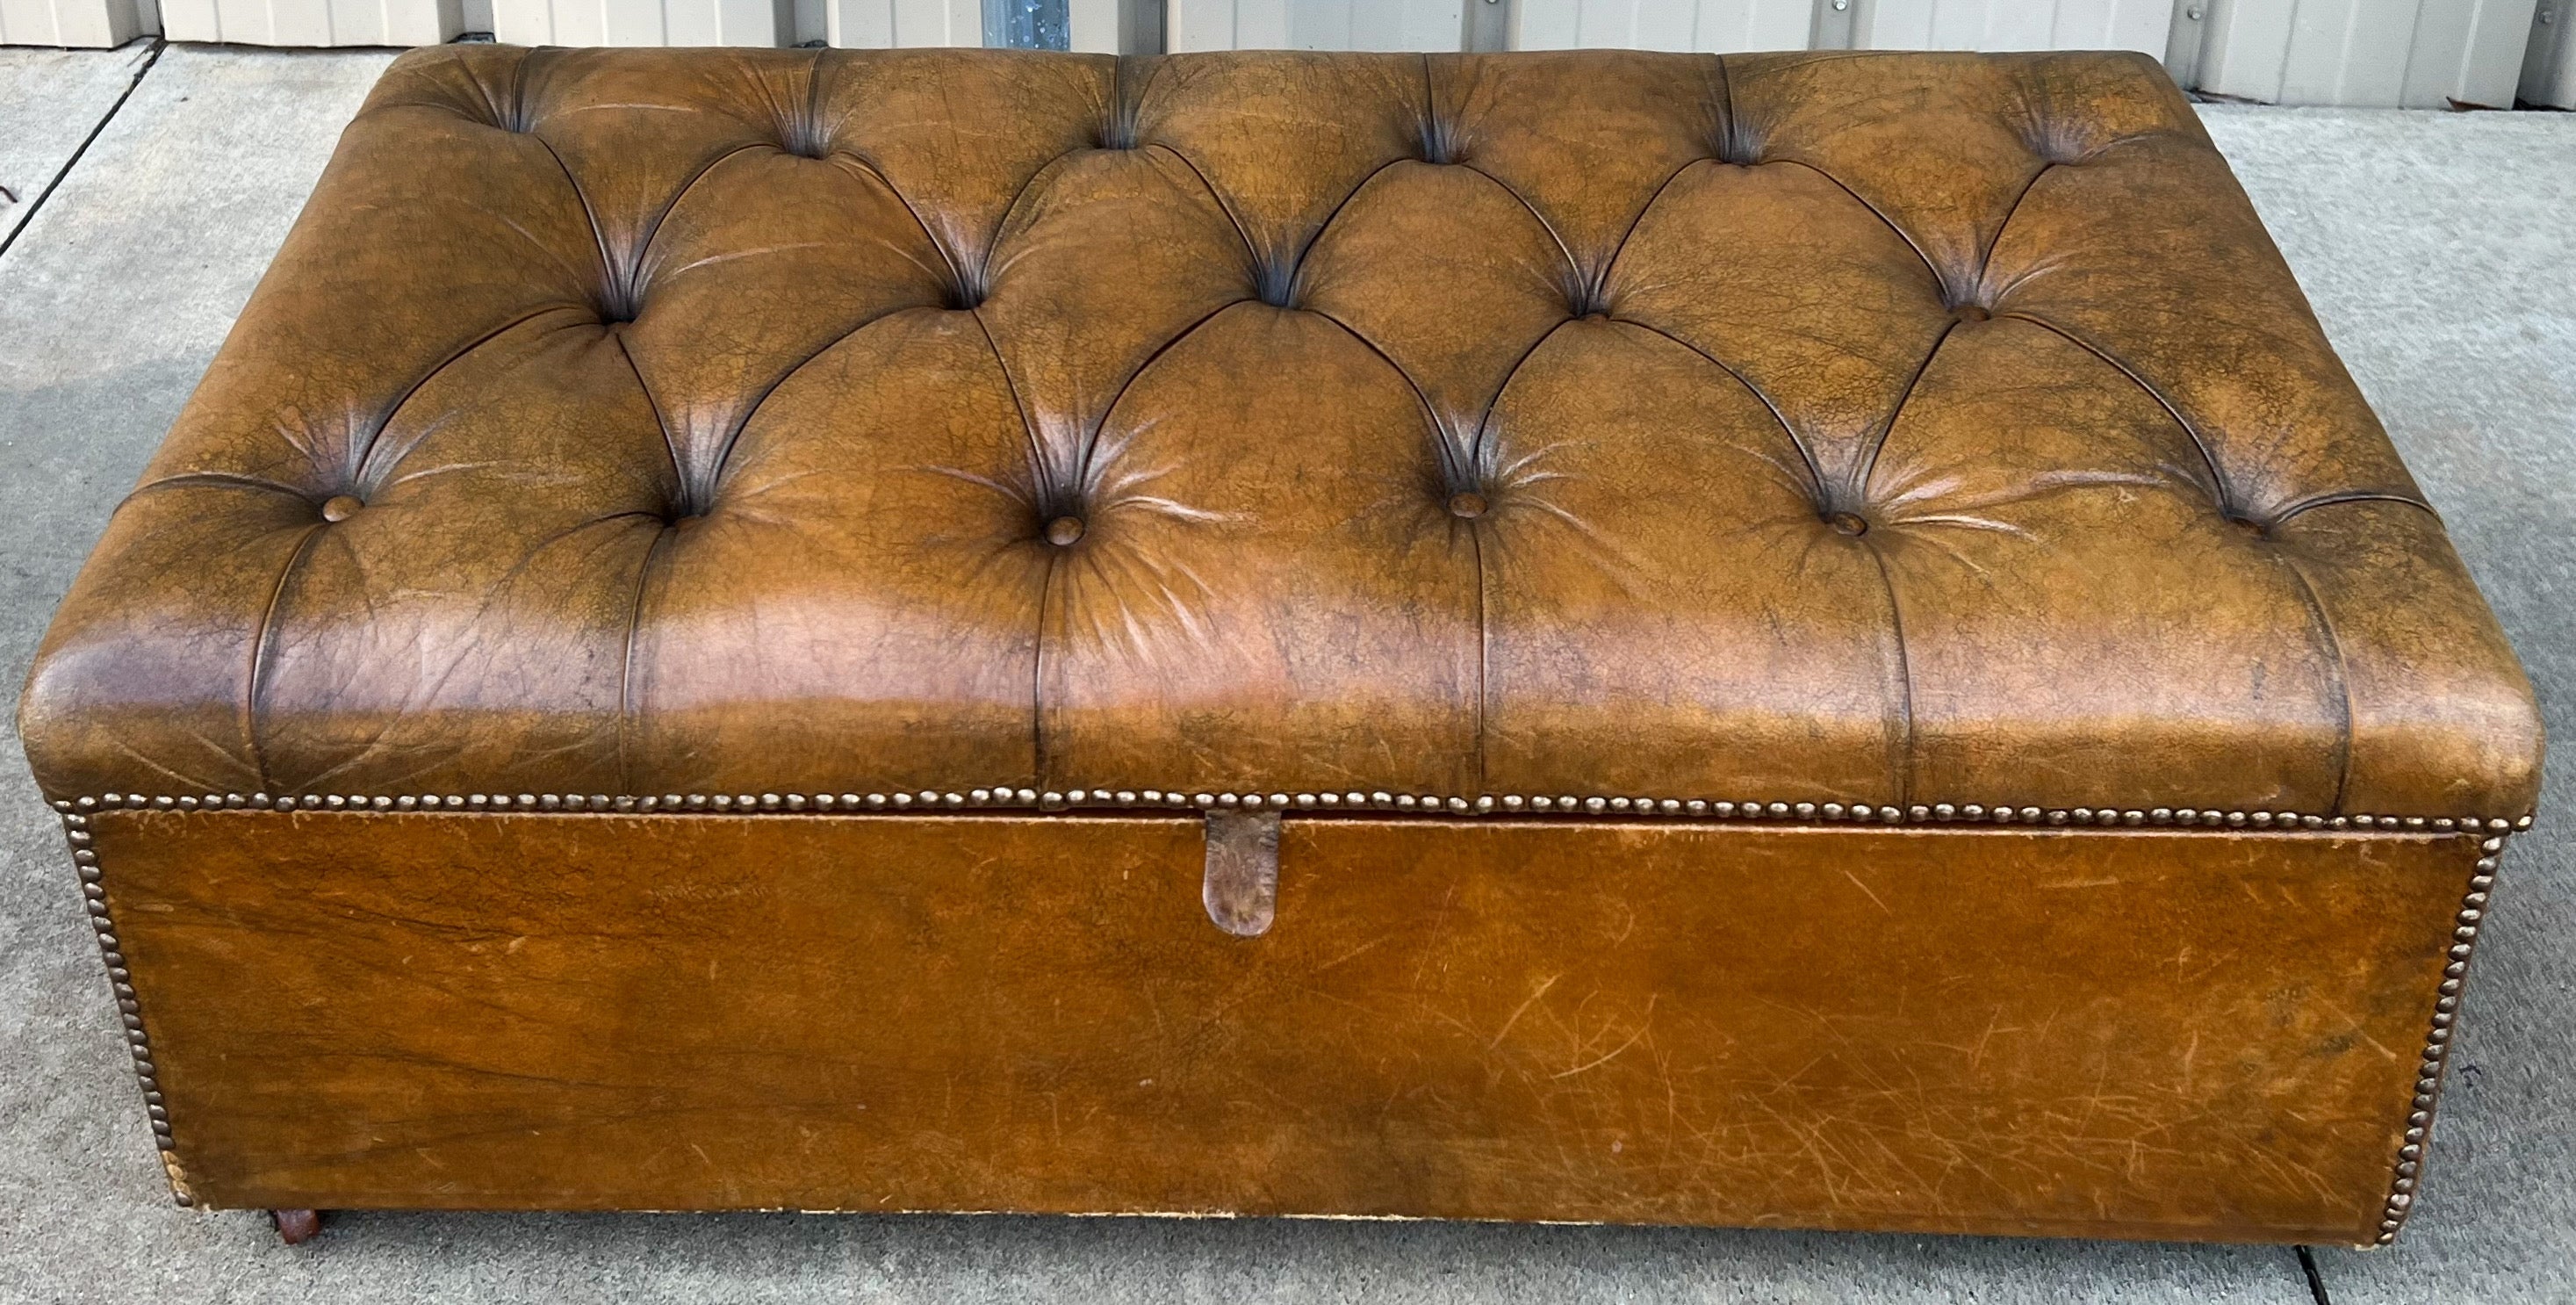 This is a 1940s English Chesterfield style tufted leather bench with storage. It is a wonderful piece with quite a bit of character. The storage will surely make it a family favorite.